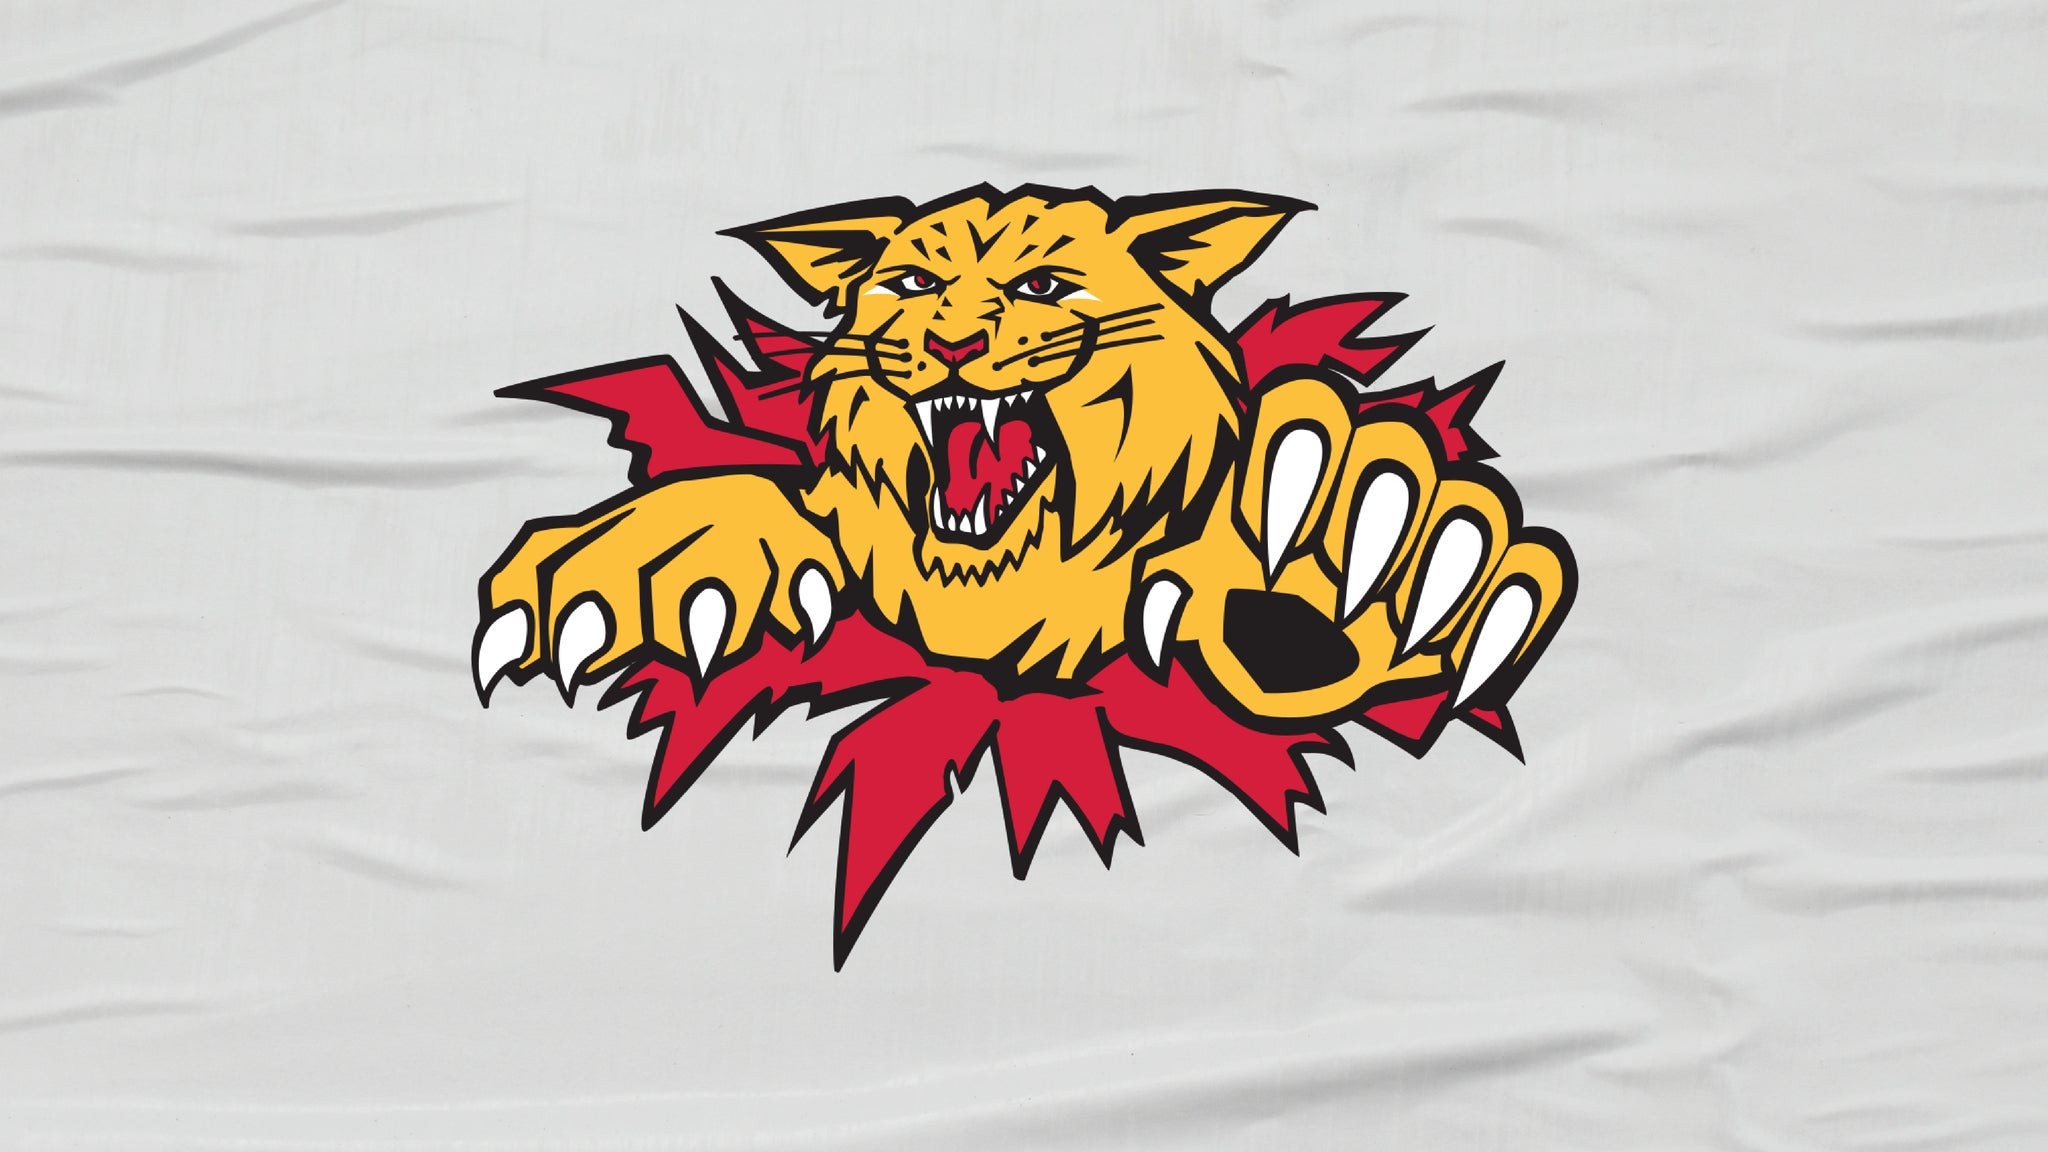 Moncton Wildcats v. Foreurs De Val D'or in Moncton promo photo for Family Pack presale offer code